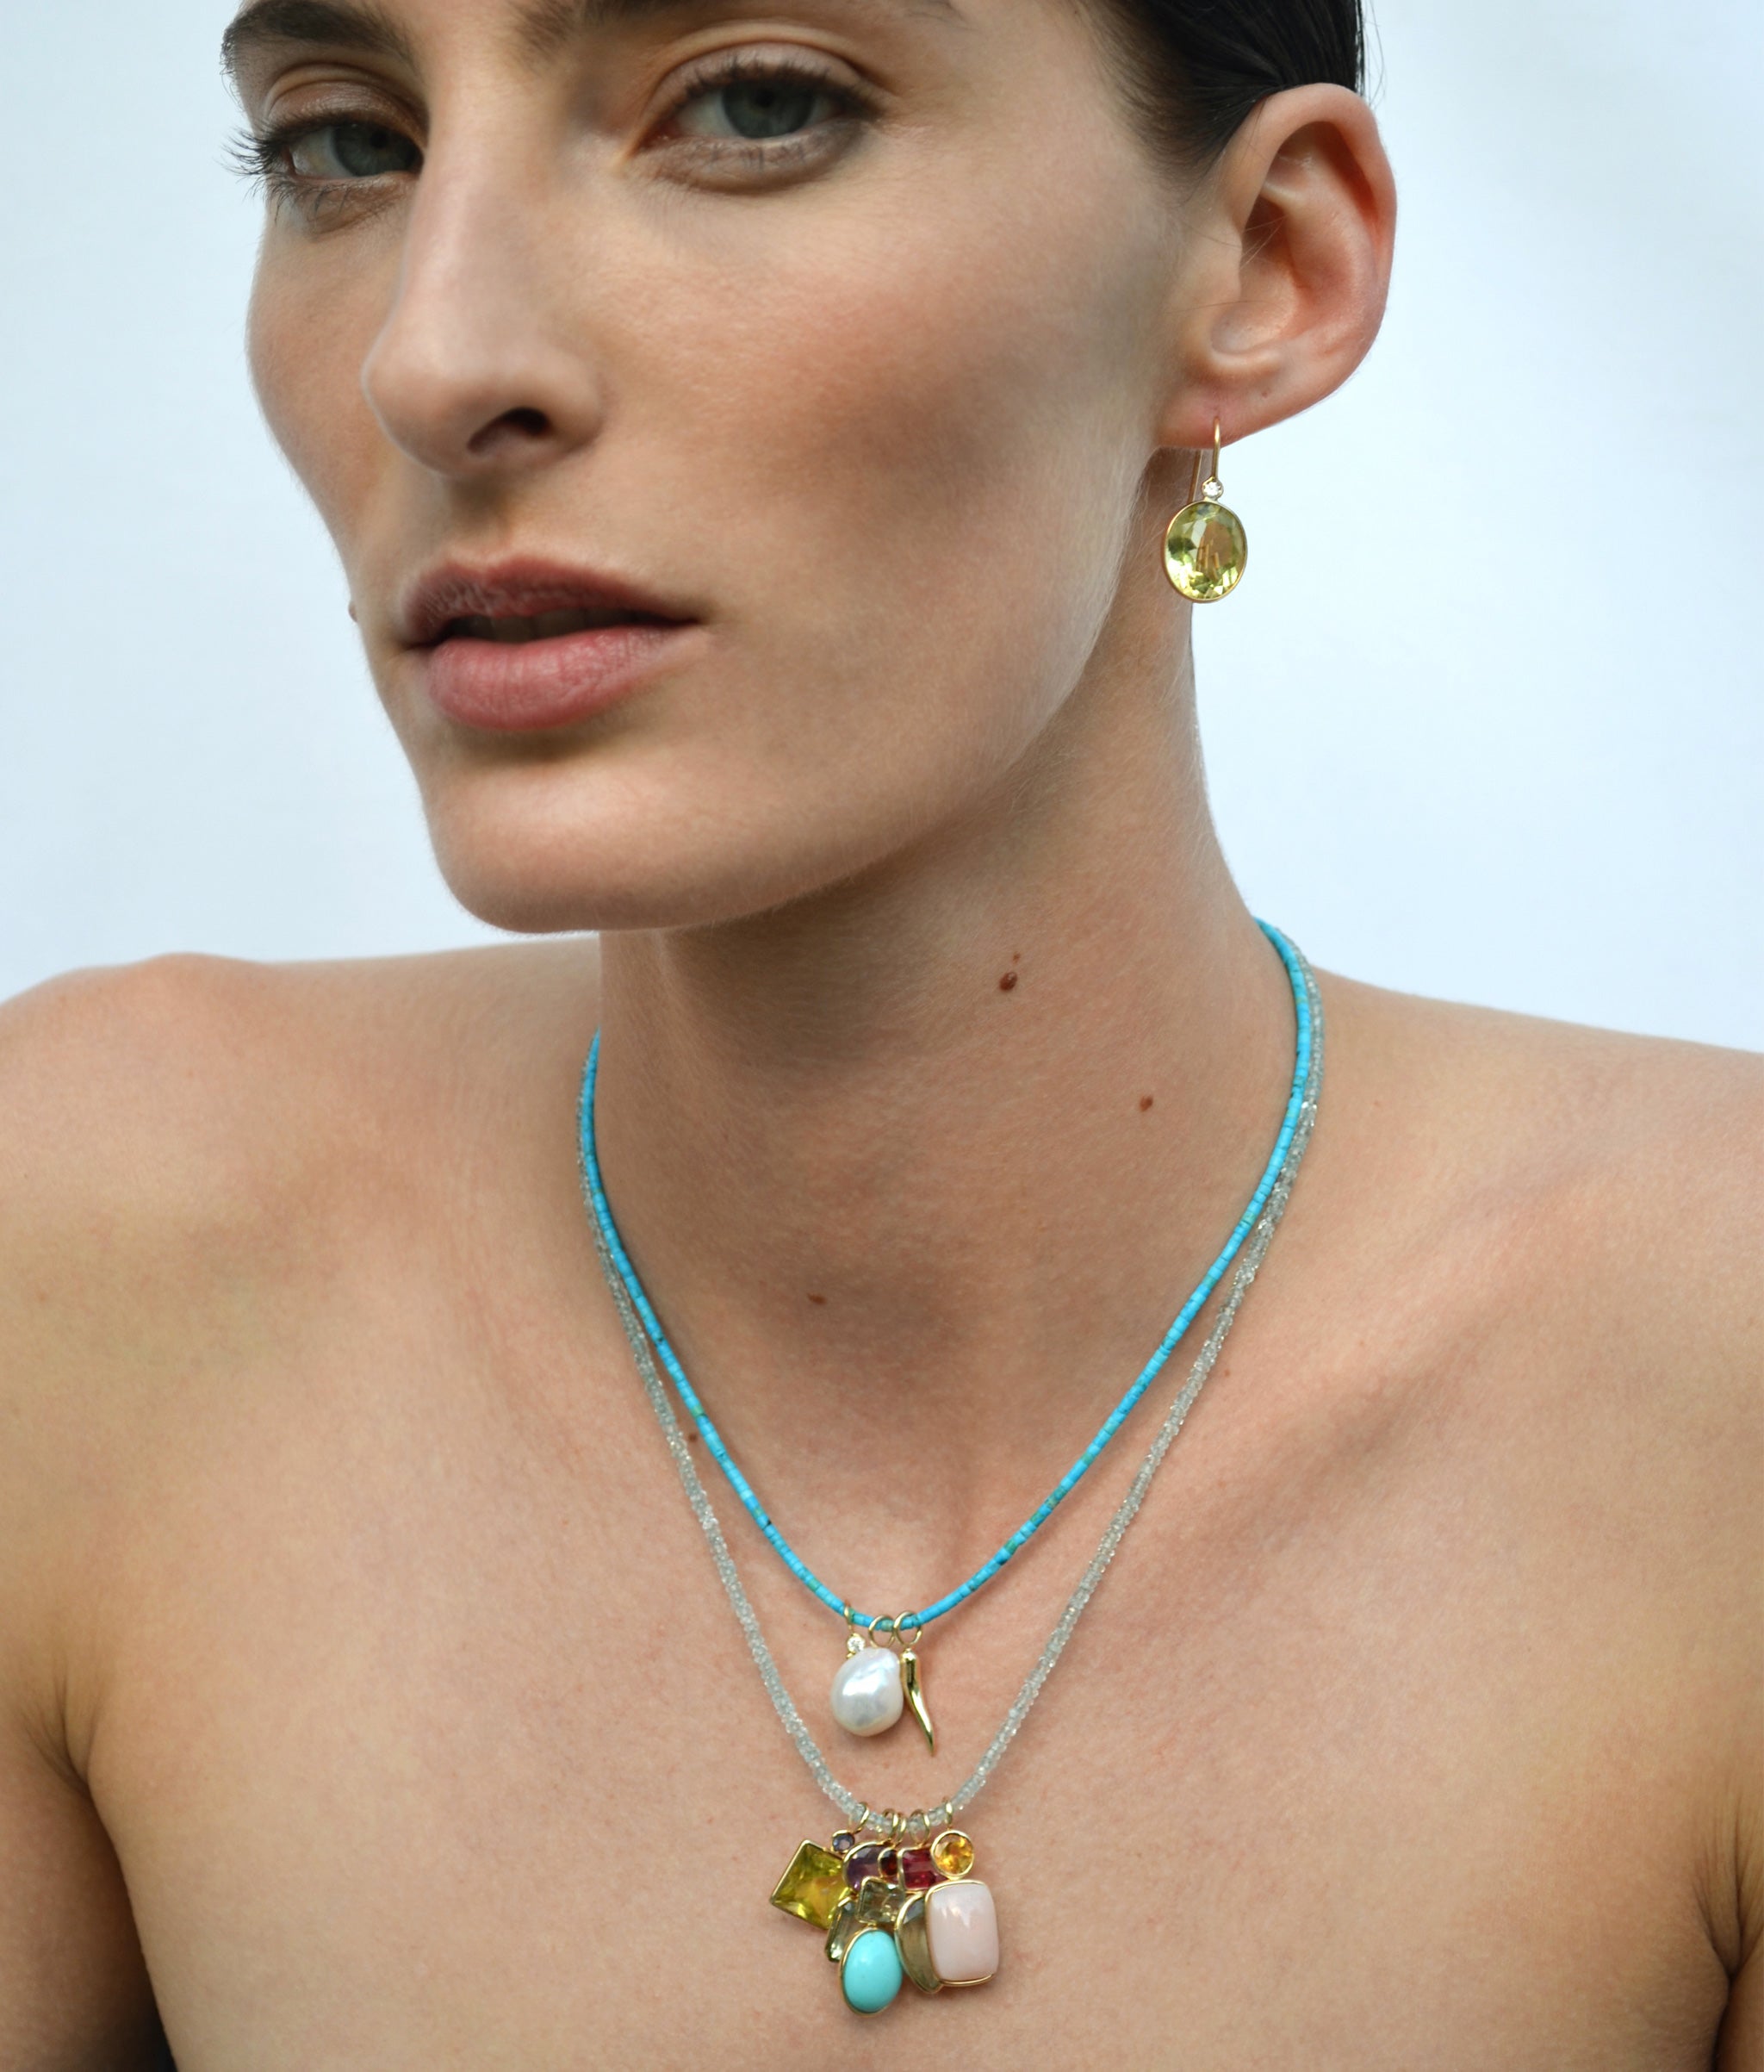 Model on sky blue backdrop wears two beaded necklaces with assorted semiprecious charms.